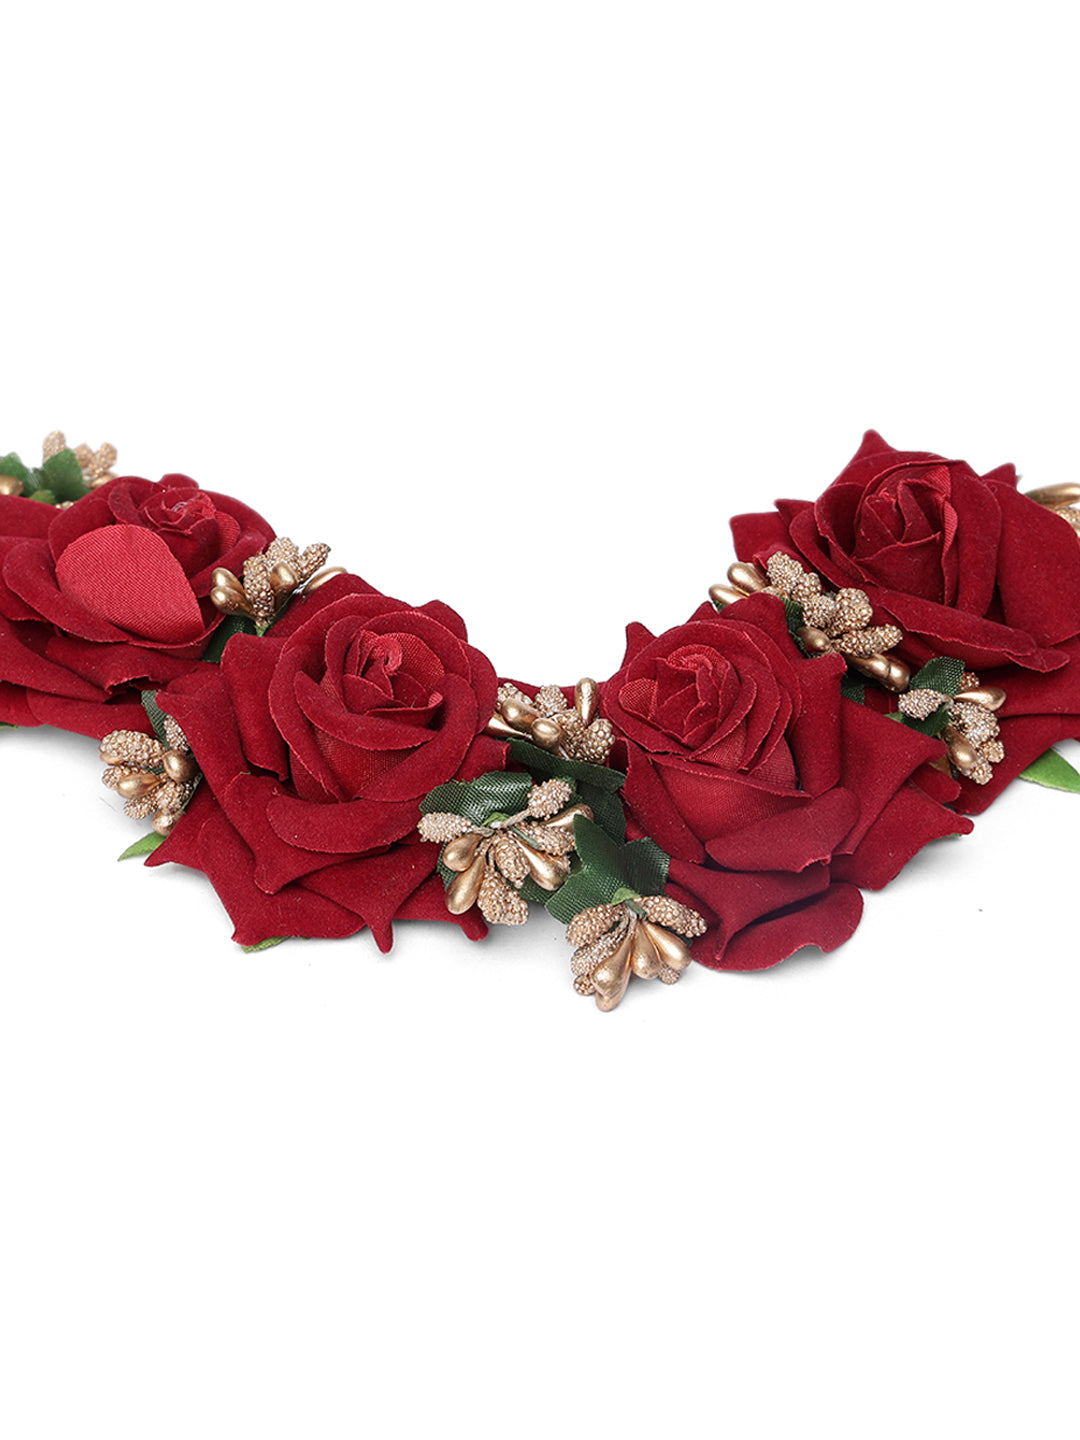 Buy Fully Red Rose Flower Gajra Hair Accessories Gajra For Women Artificial Flower  Gajra Juda Hair Accessories Hair Gajra For Girls And Women 12 Gram Red Pack  Of 1 Online at Low